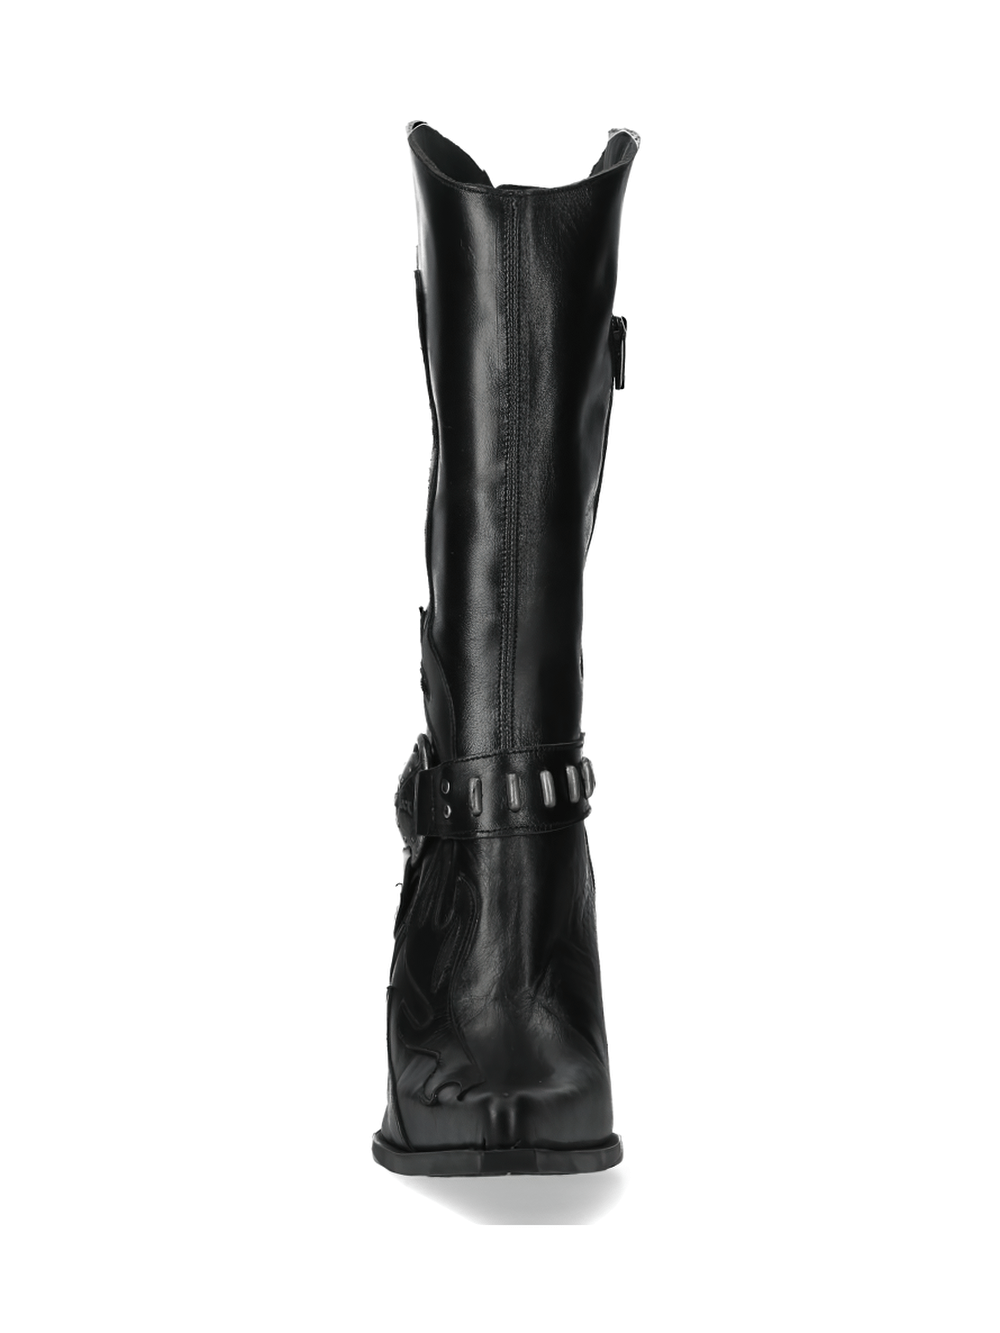 NEW ROCK Black Western Heeled Boots with Buckle Detail